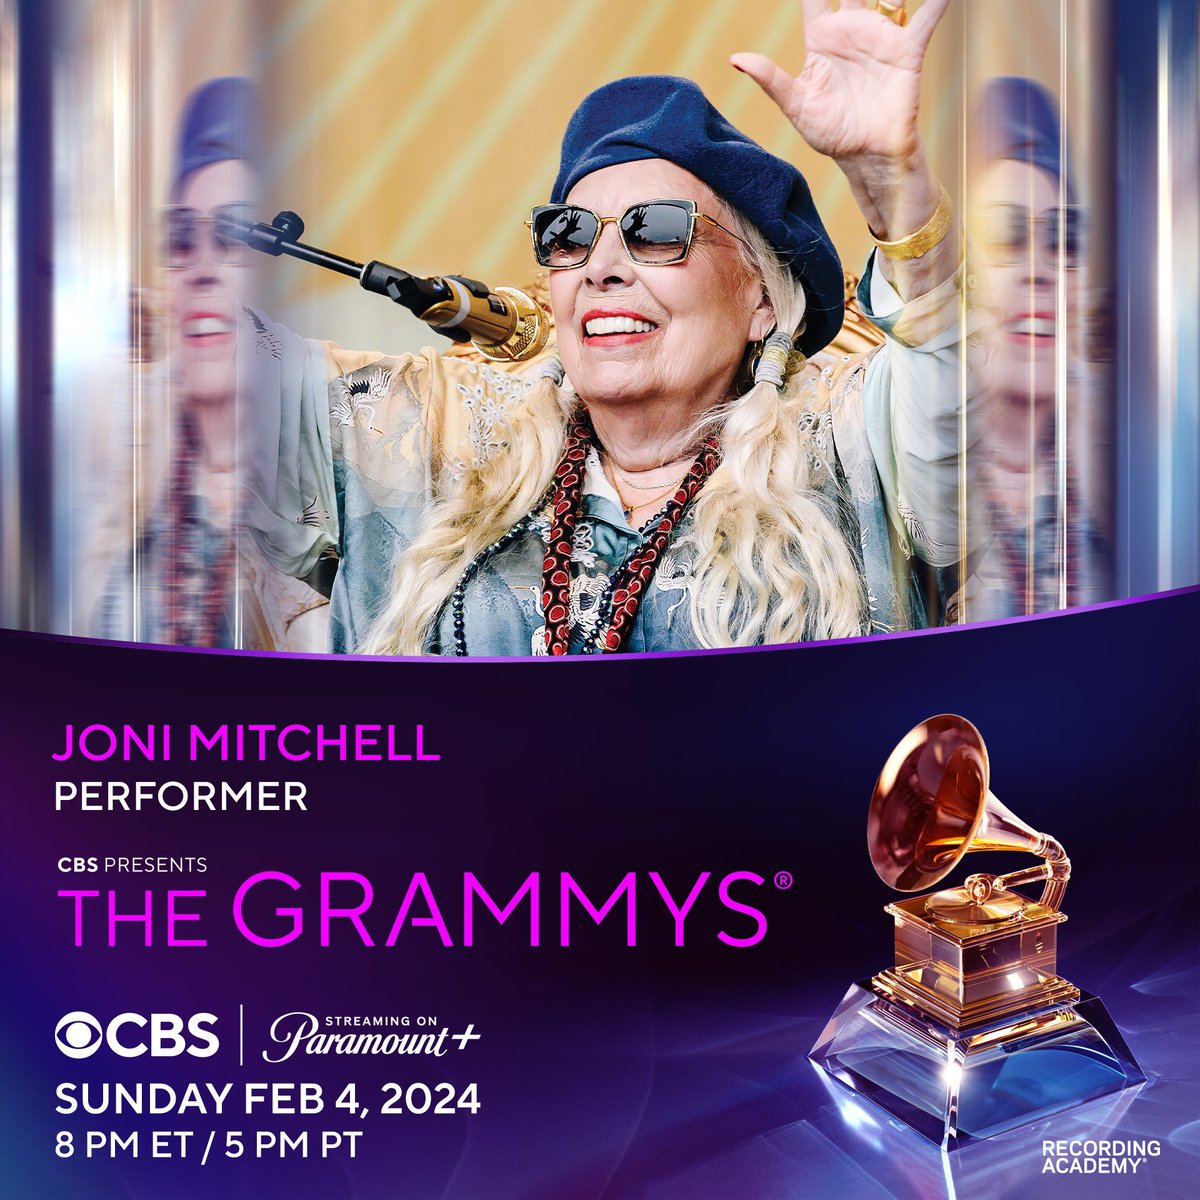 Don’t miss 9-time GRAMMY winner and past @MusiCares Person of the Year Joni Mitchell’s first ever #GRAMMYs performance! Tune-in to @CBS on Sunday. Feb. 4 at 8 PM ET / 5 PM PT